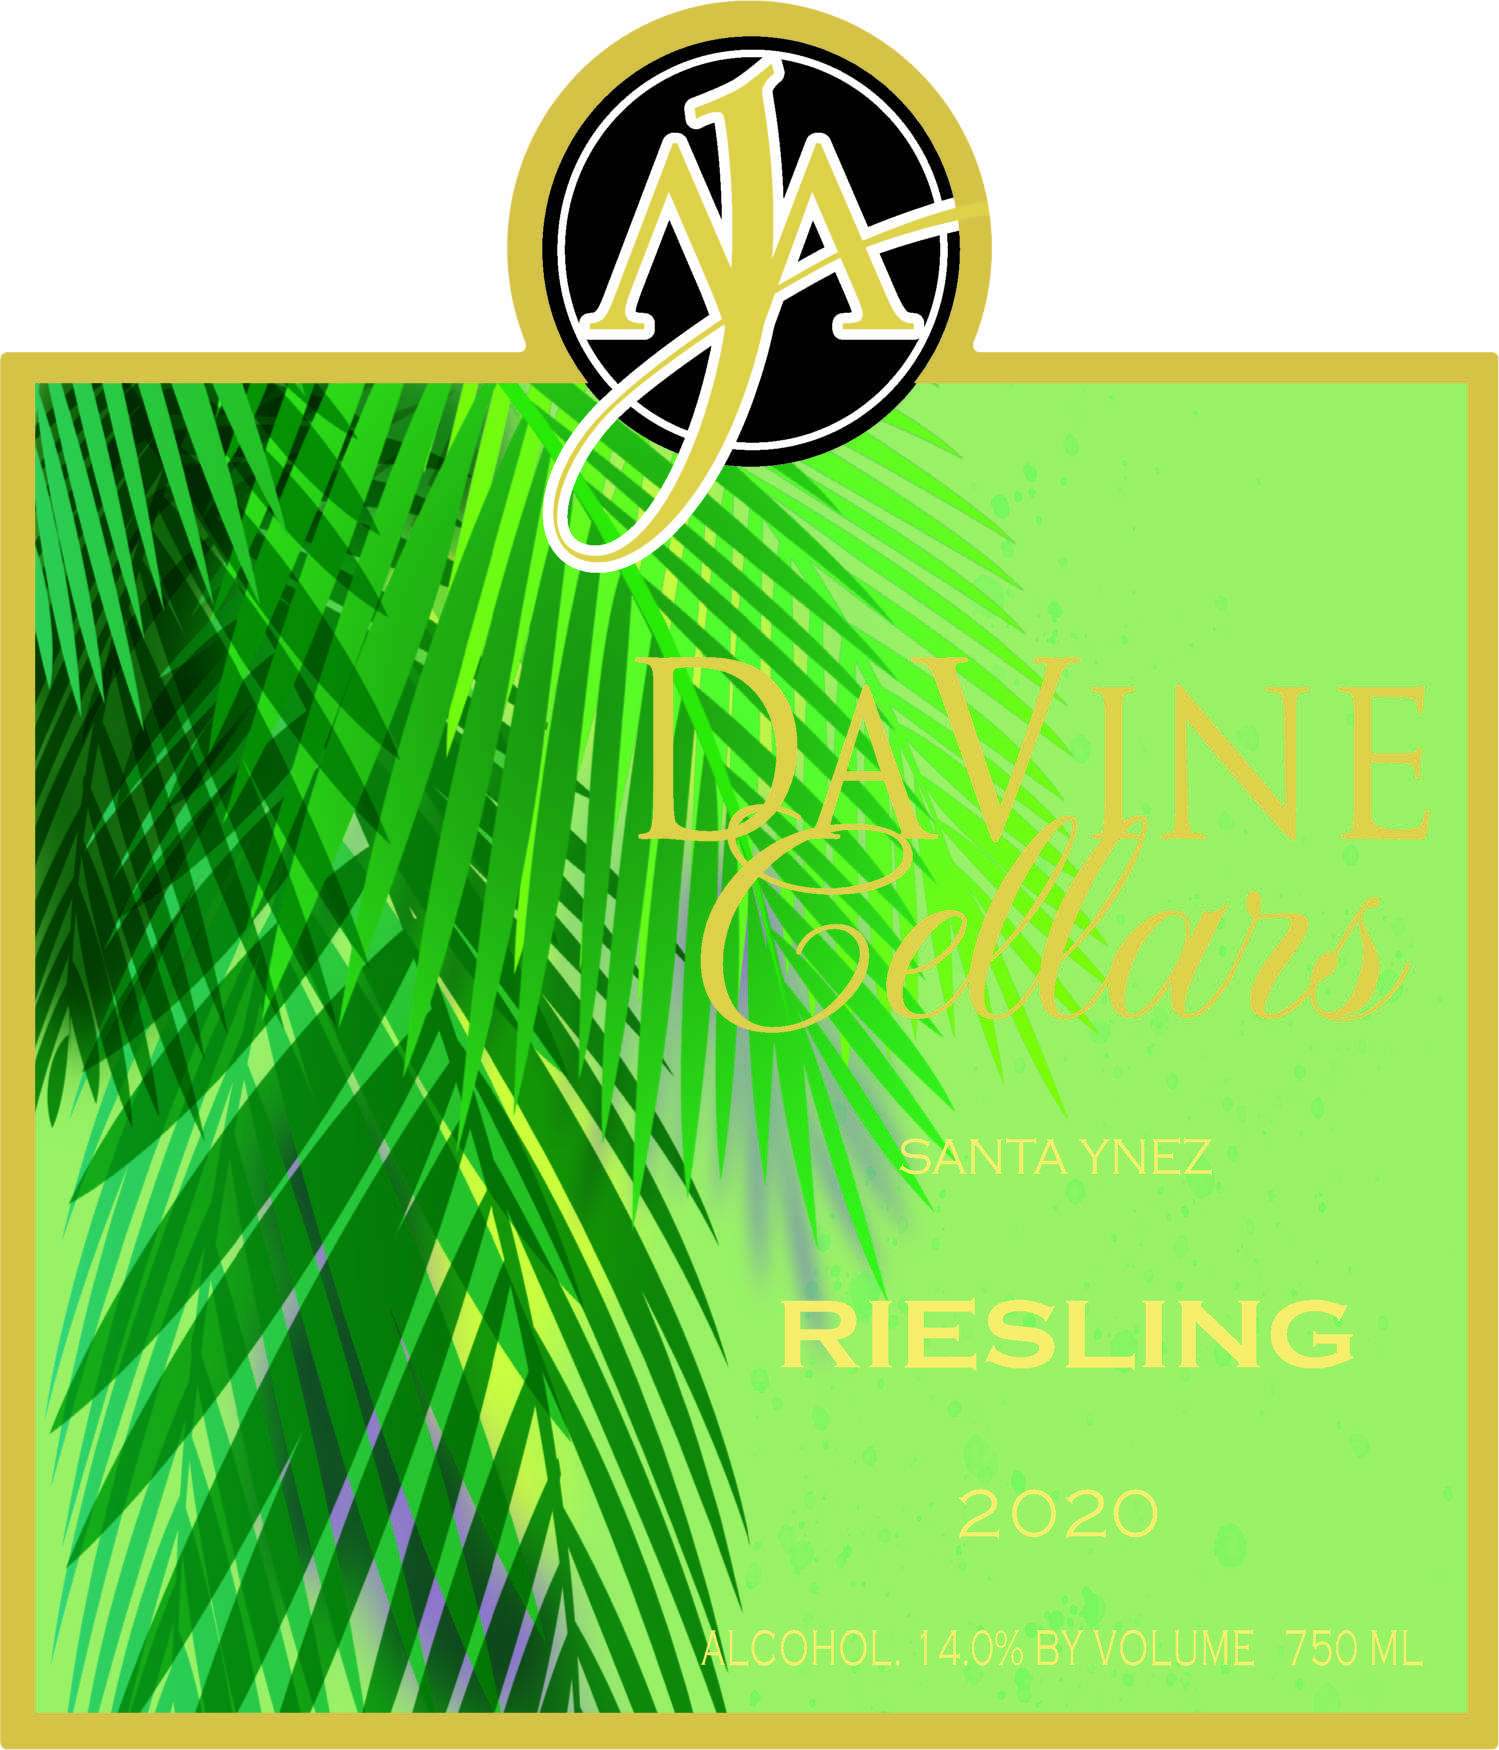 Product Image for 2020 Santa Ynez Riesling "First Love"